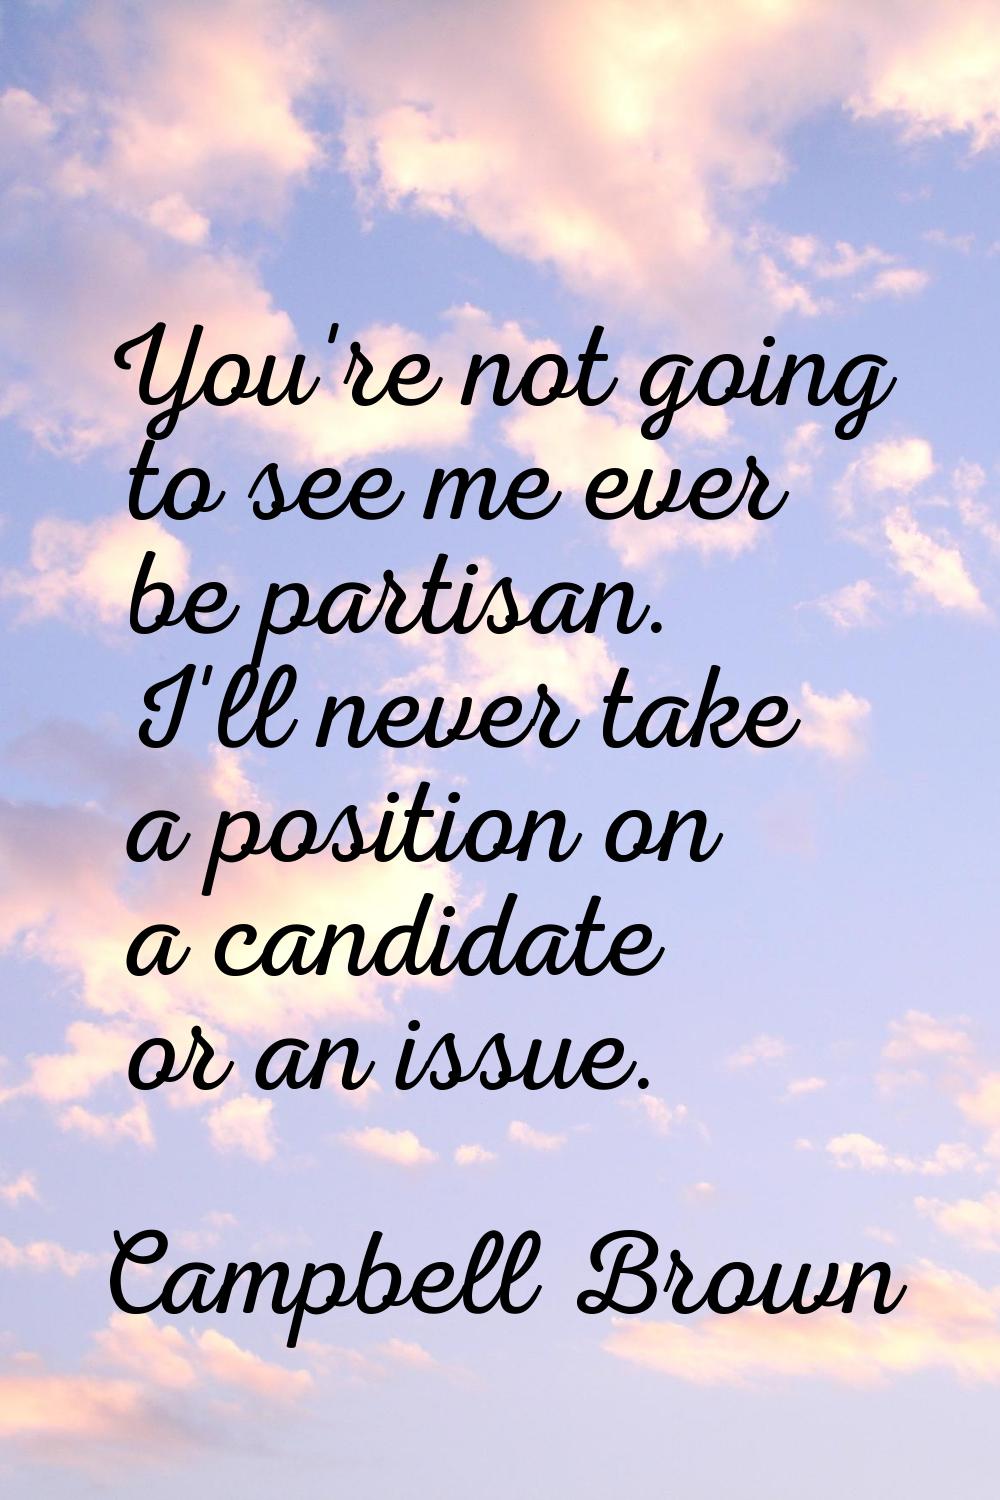 You're not going to see me ever be partisan. I'll never take a position on a candidate or an issue.